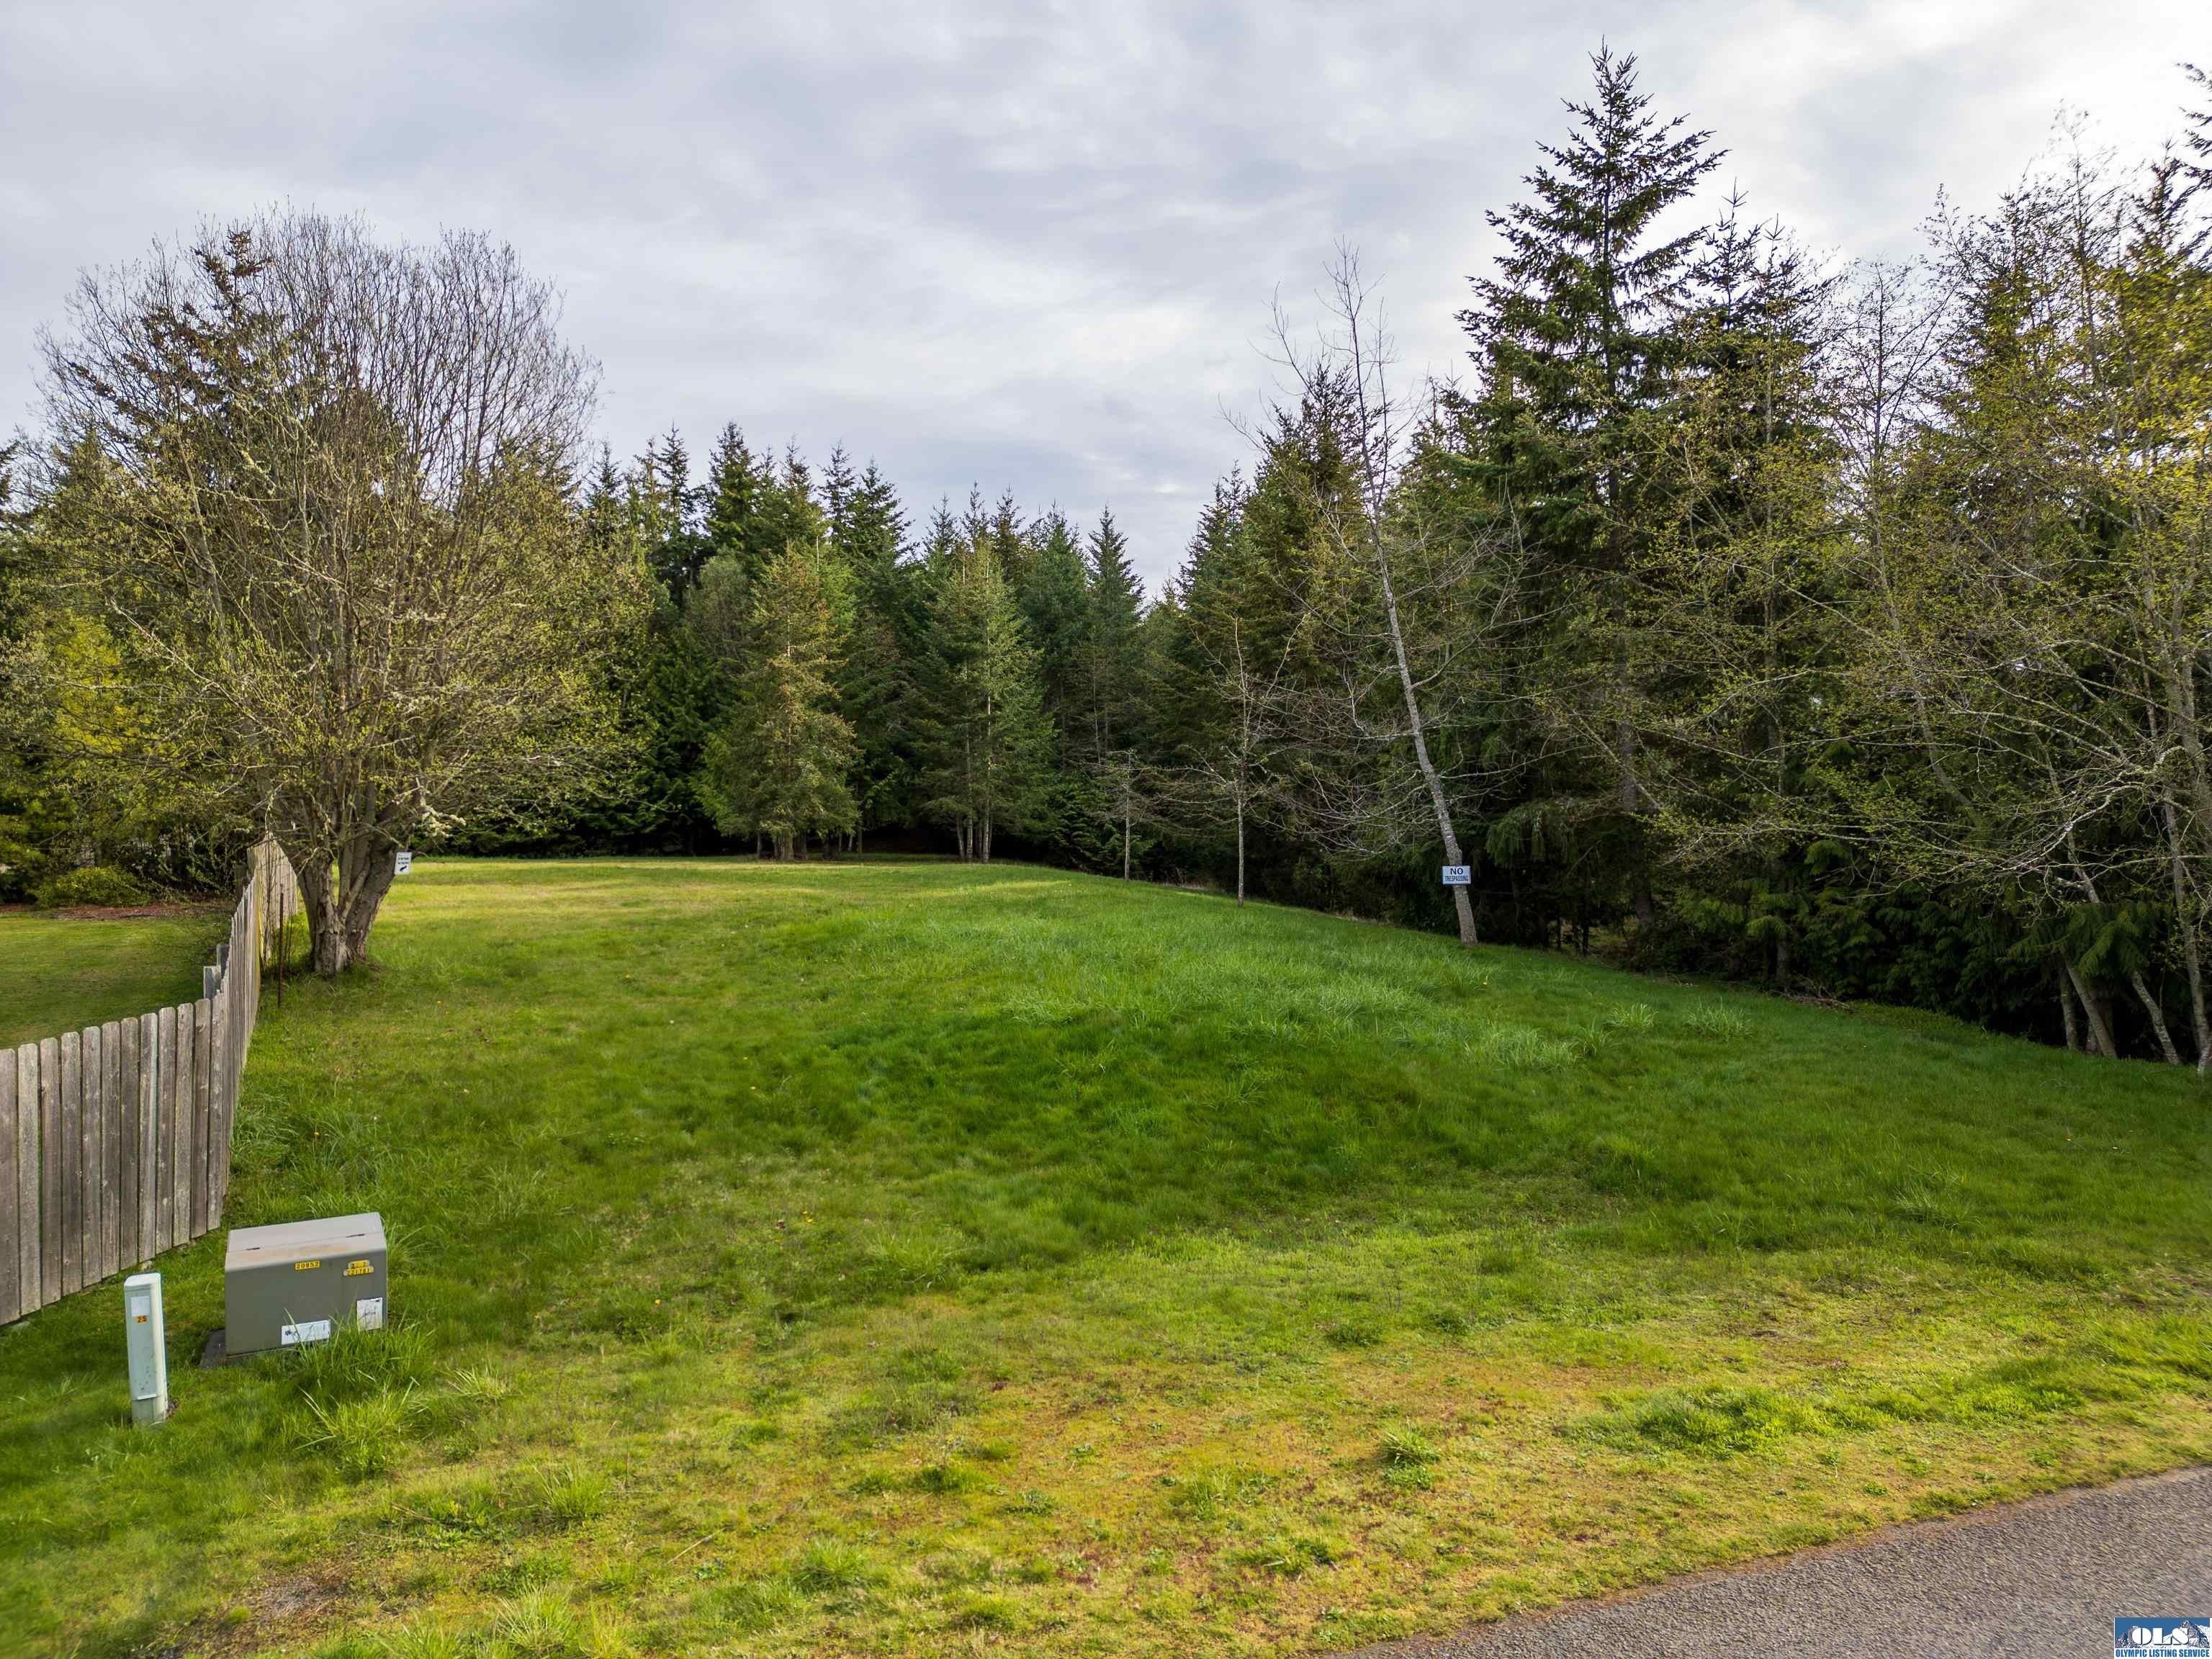 4. Rhododendron Drive Lot 5